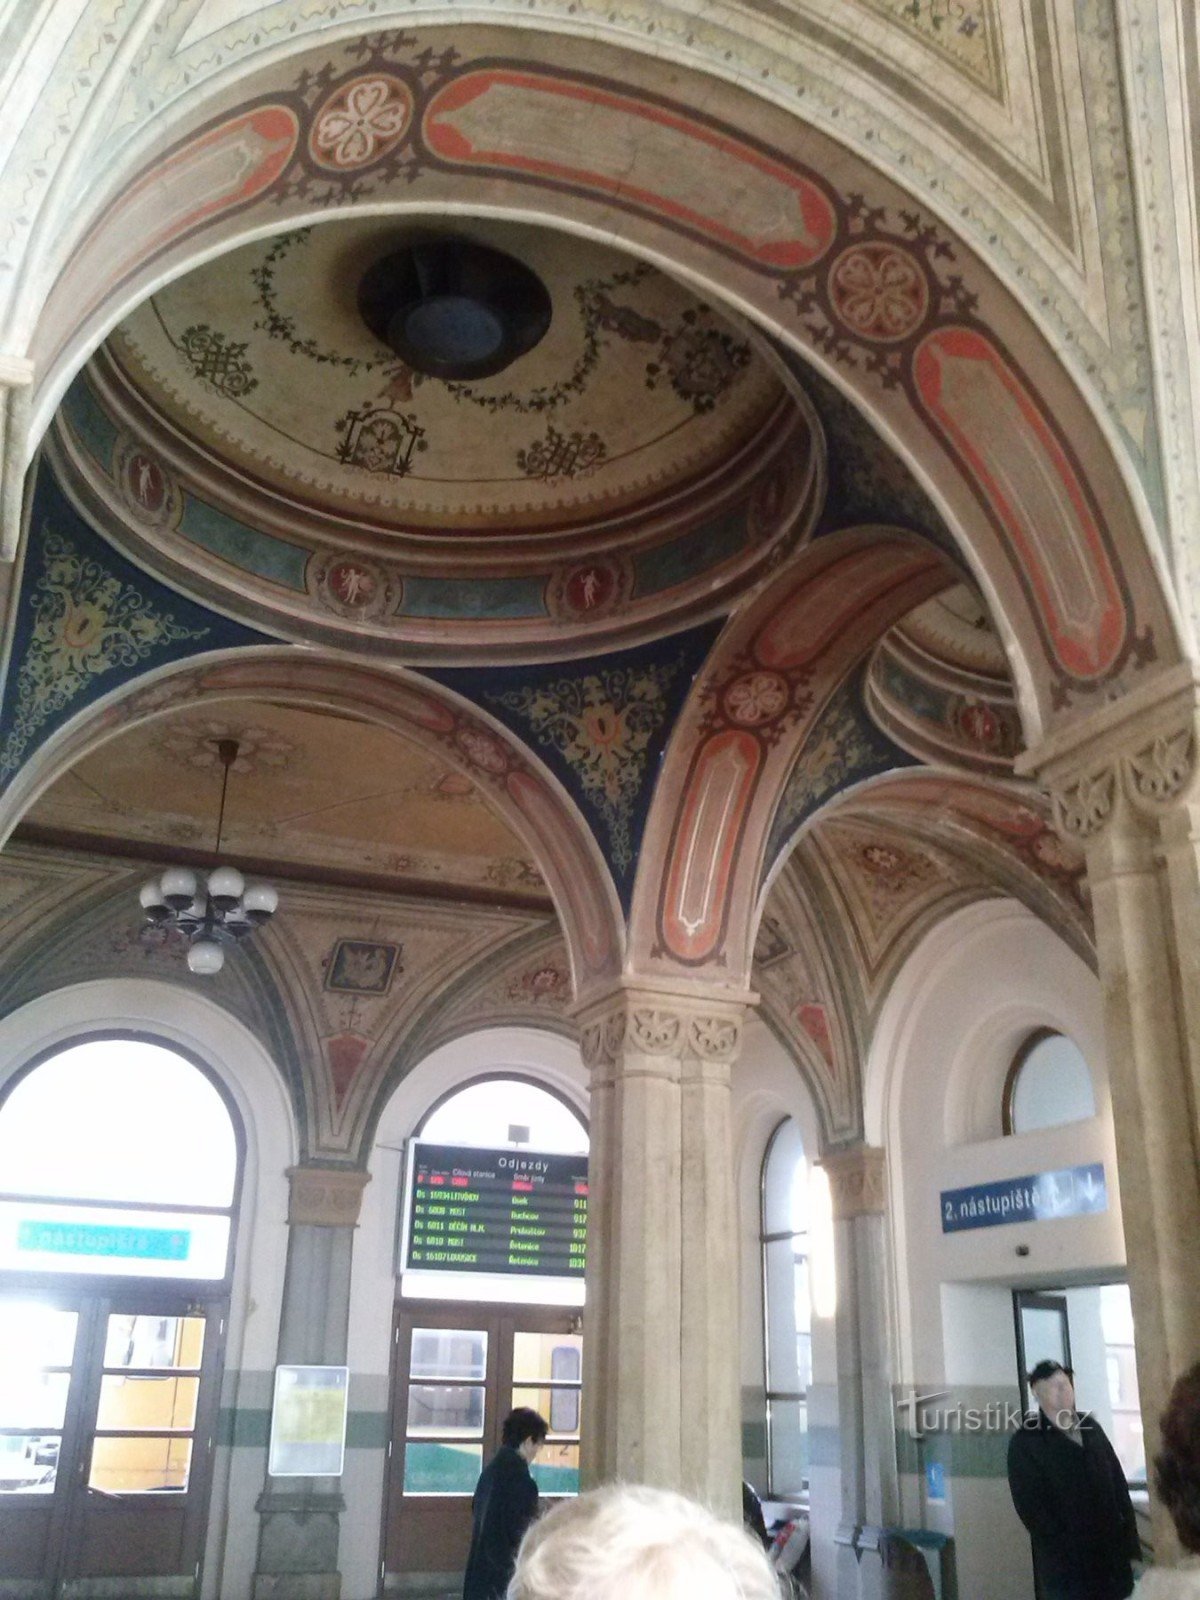 3. The Teplice station hall is an ornament of the station, but unfortunately not its building